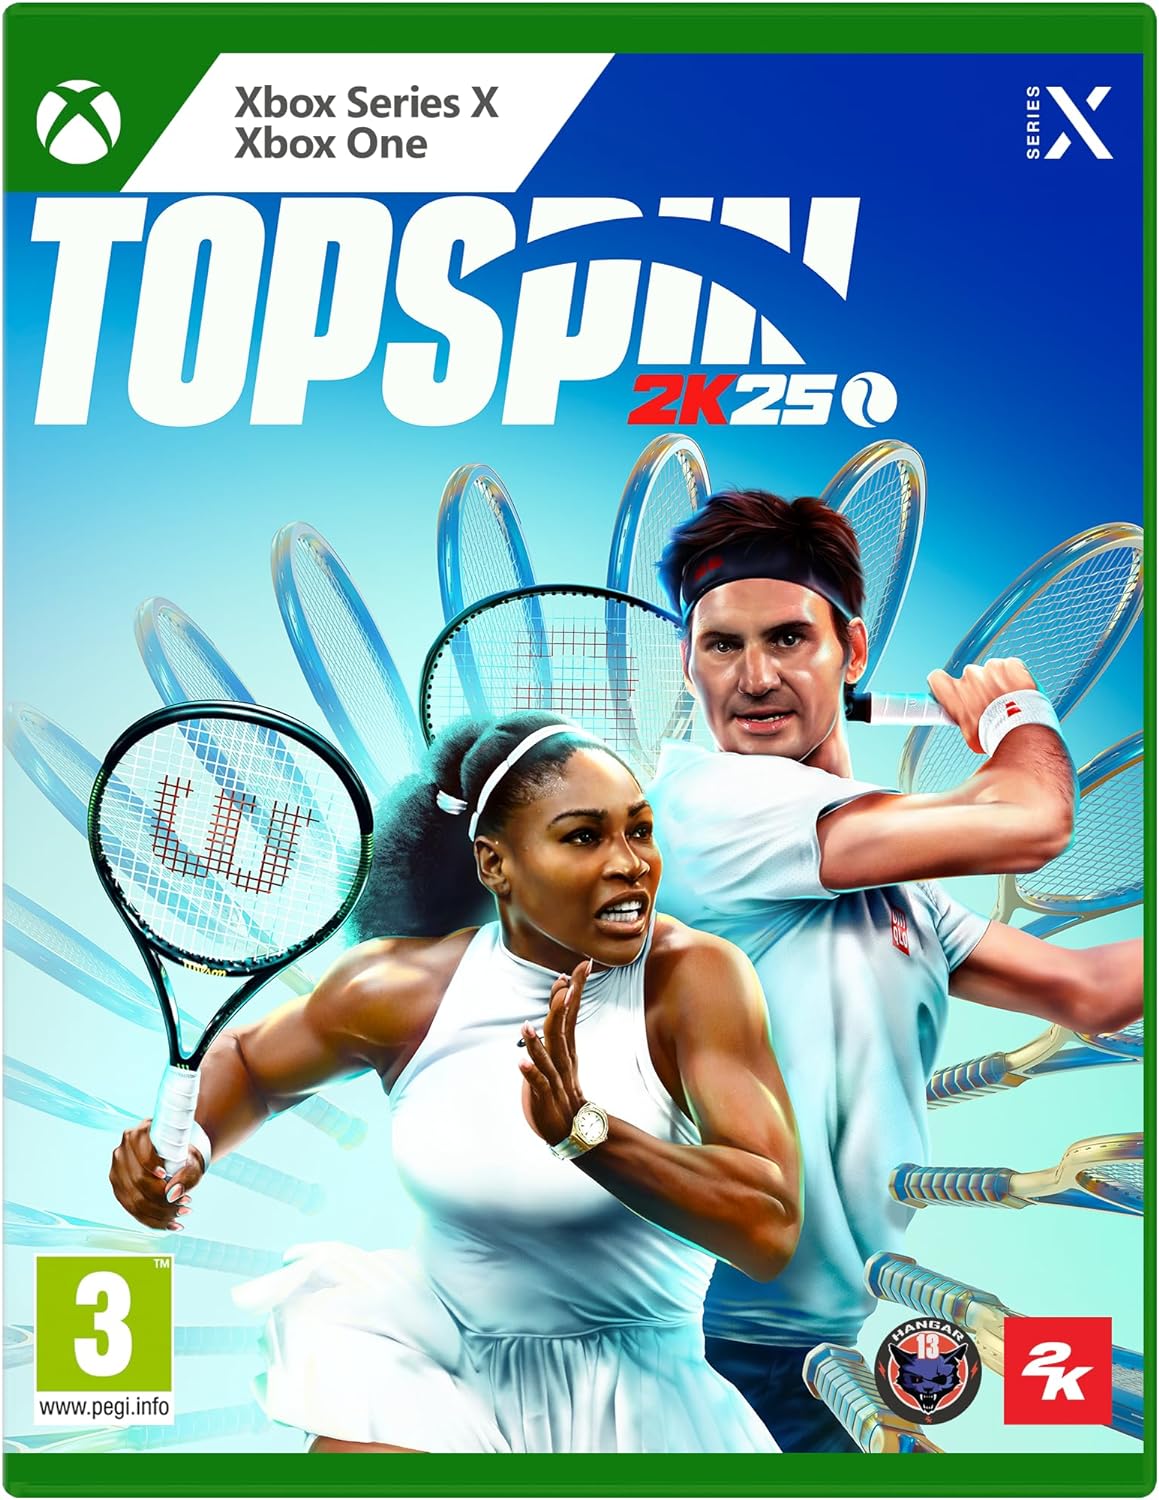 TopSpin 2K25 Deluxe Edition Key (Xbox One/Series X): USA